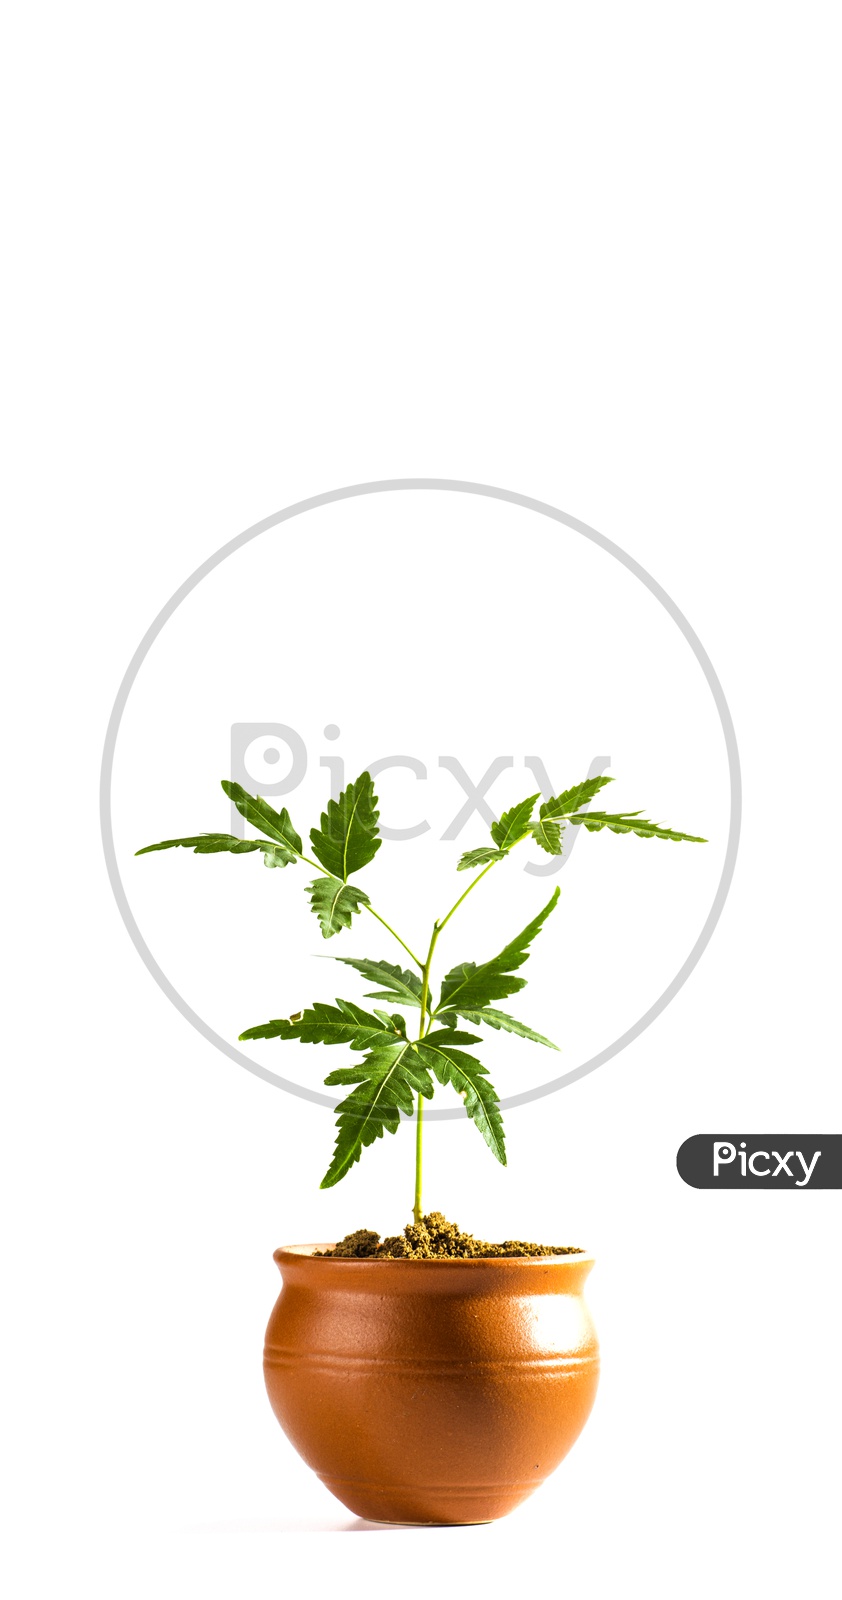 Young Neem tree in clay pot on white background. Azadirachta indica Tree.